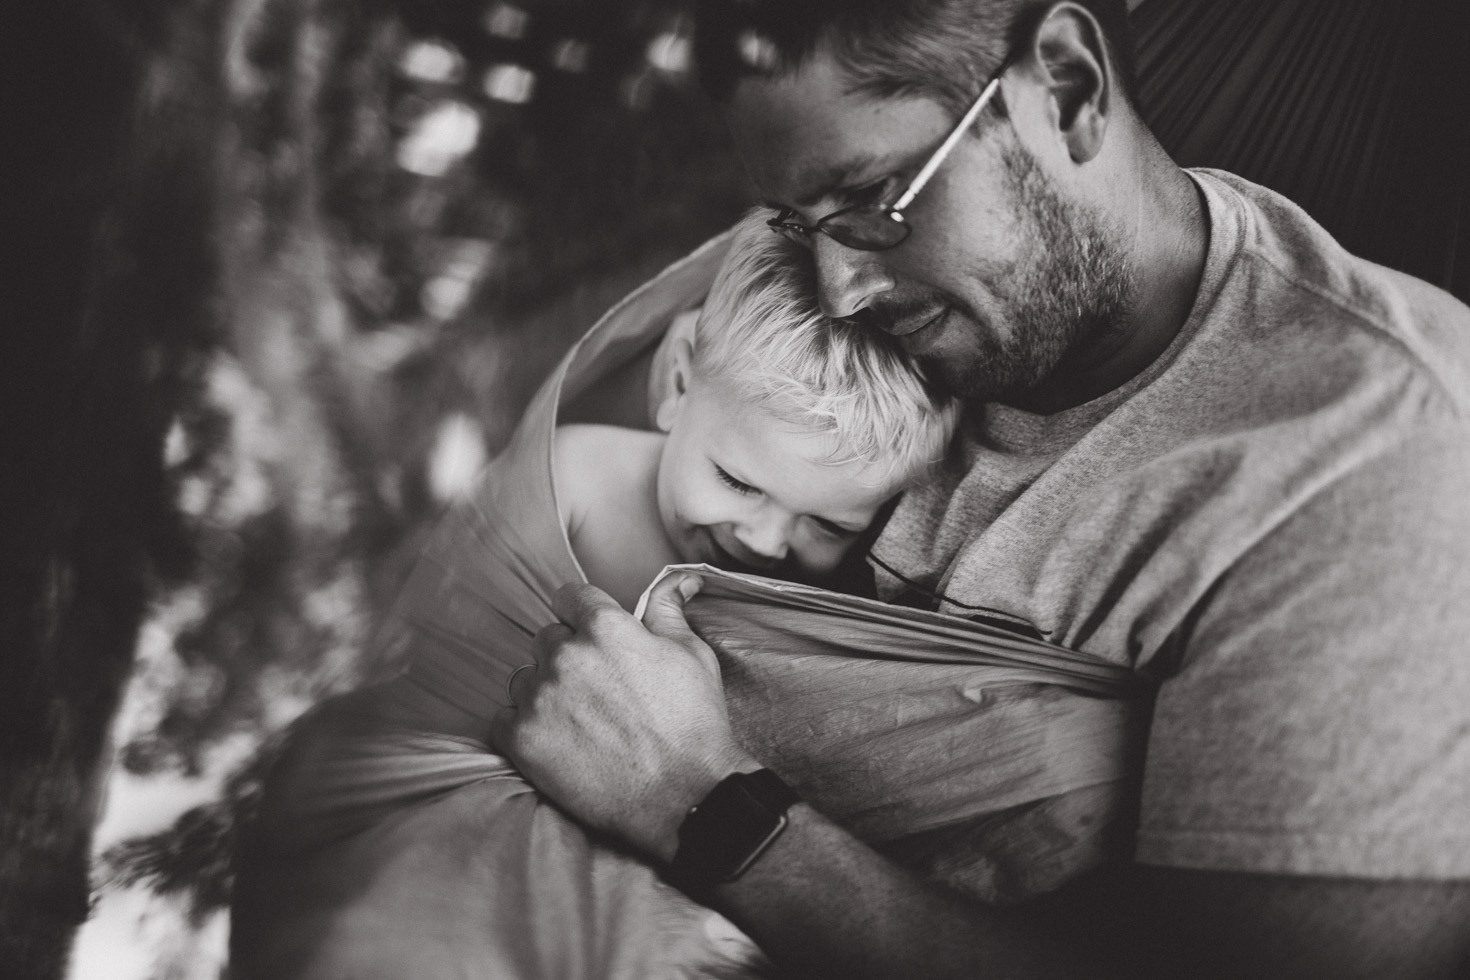 Father embracing son in loving connection in hammock; black and white portrait 